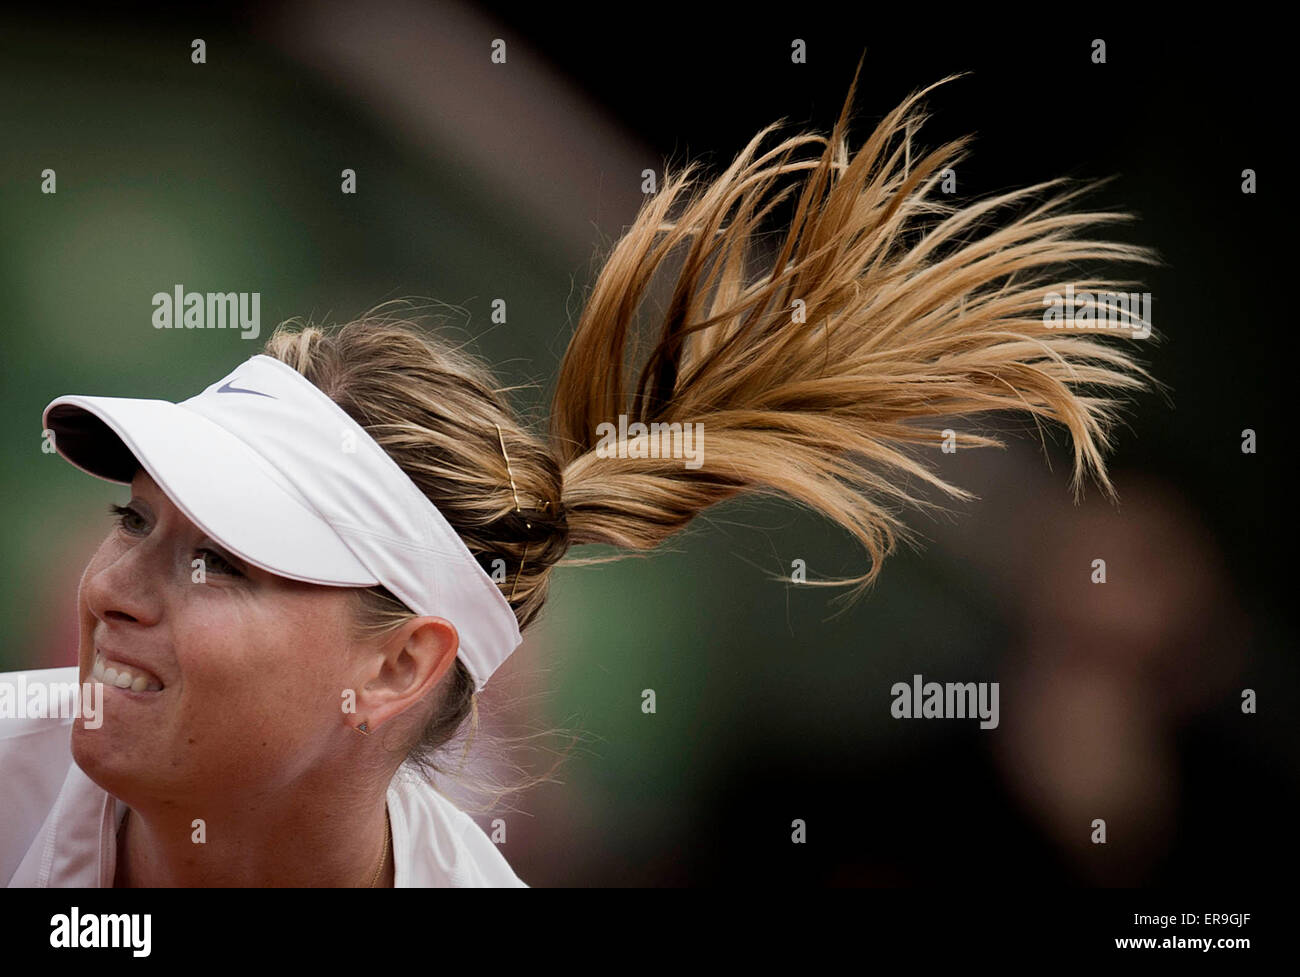 Paris, France. 29th May, 2015. Maria Sharapova of Russia competes during the women's singles 3rd round match against Samantha Stosur of Australia at the 2015 French Open tennis tournament in Paris, France, on May 29, 2015. Maria Sharapova won 2-0. Credit:  Chen Xiaowei/Xinhua/Alamy Live News Stock Photo